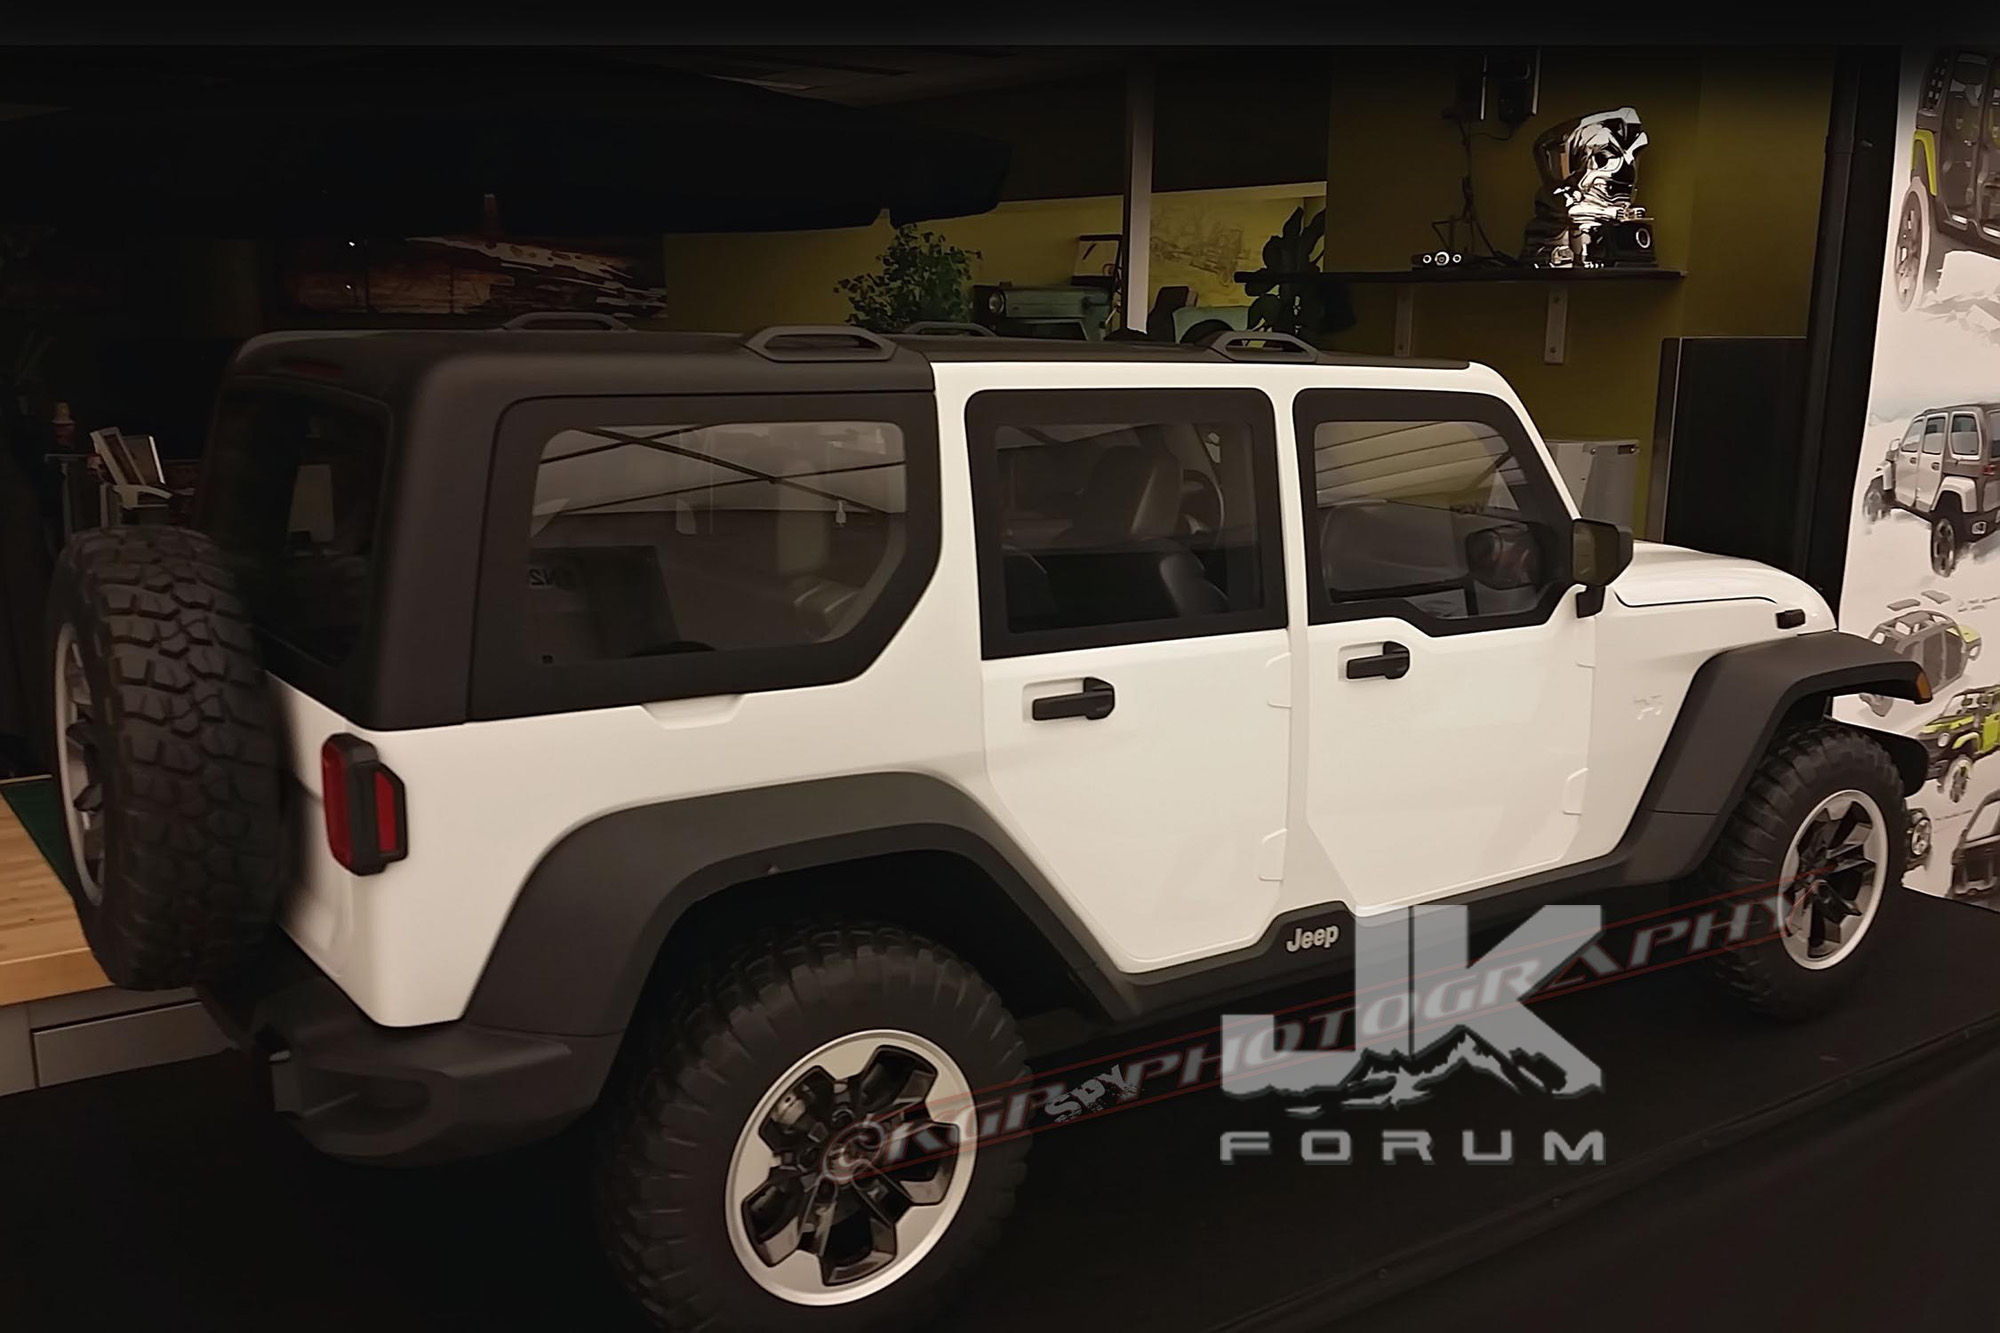 LEAKED! New JL Jeep Wrangler's Hot Interior Photos  - The top  destination for Jeep JK and JL Wrangler news, rumors, and discussion